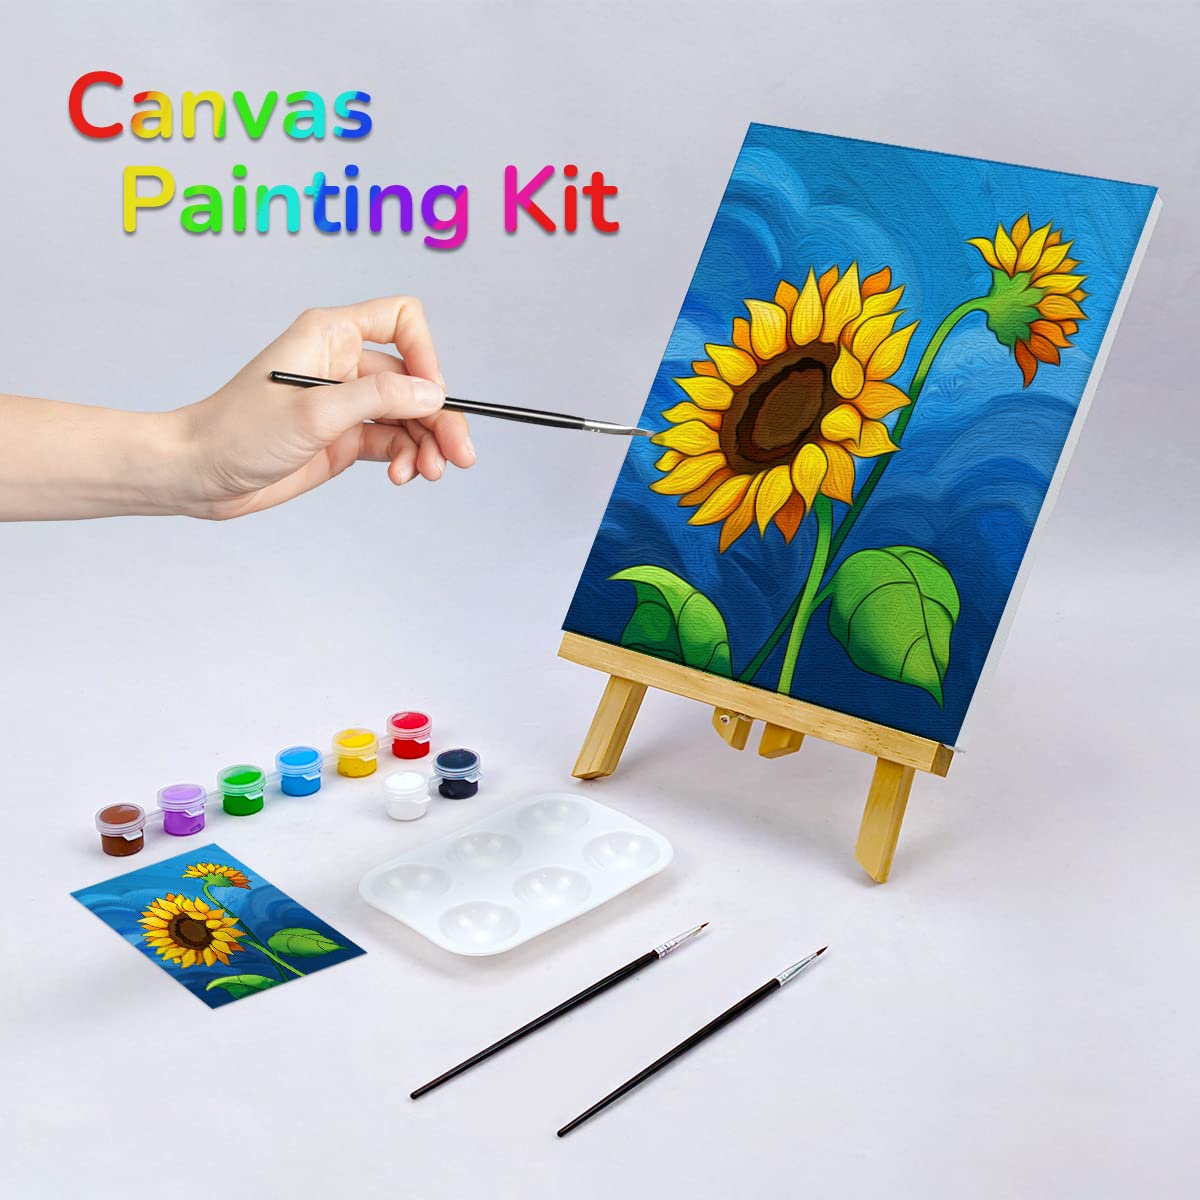 VOCHIC Canvas Painting Kit for Adults, Pre Drawn Stretched Cotton